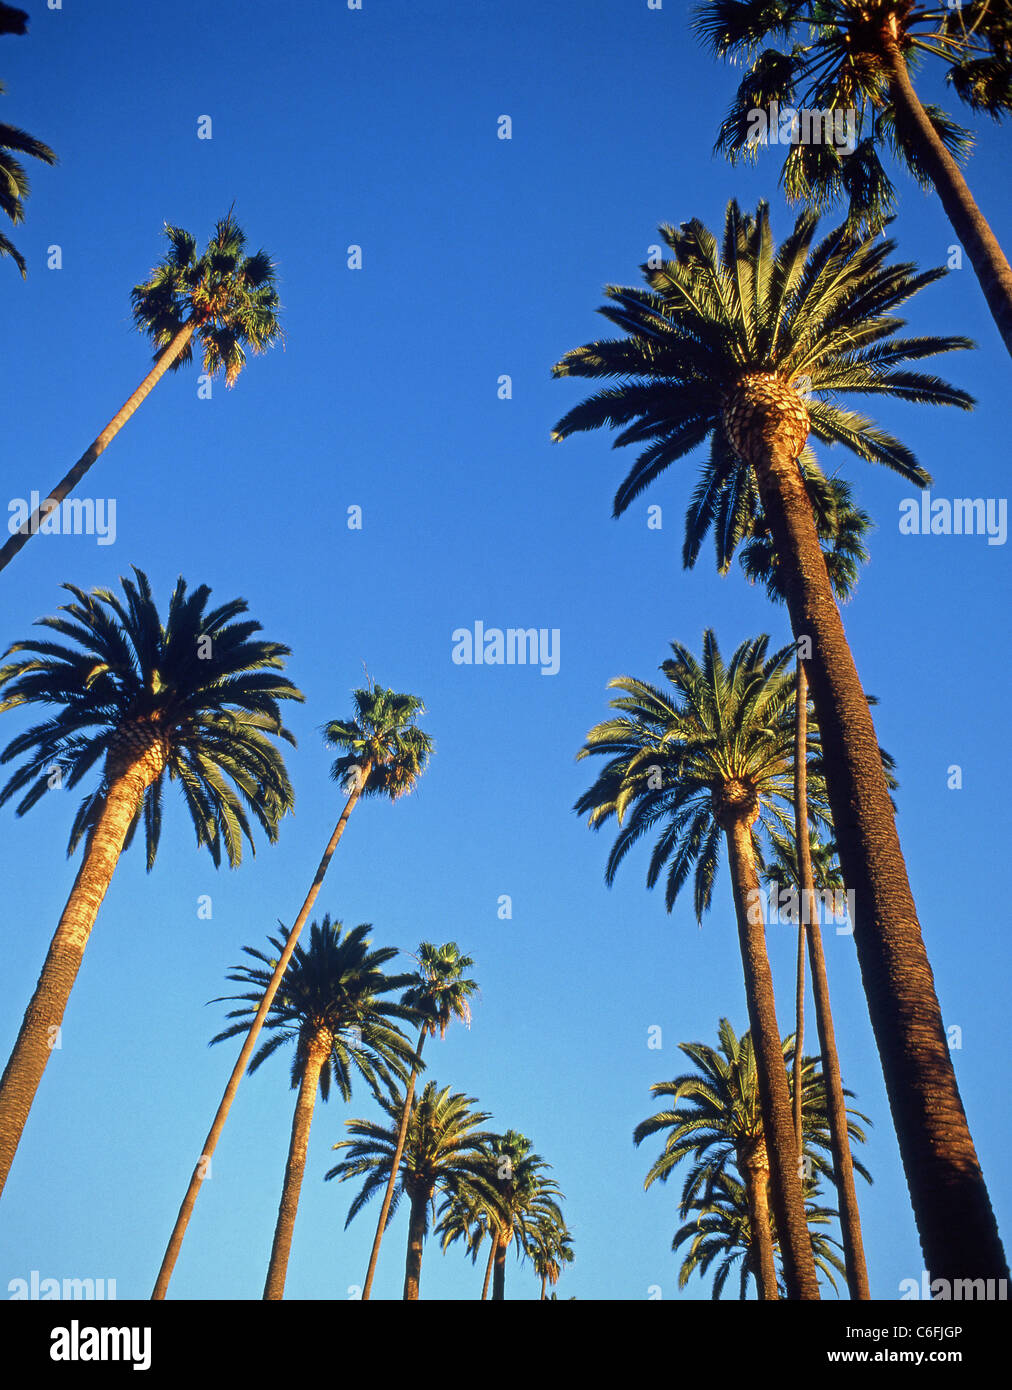 Palm trees along boulevard, Beverly Hills, Los Angeles, California, United States of America Stock Photo